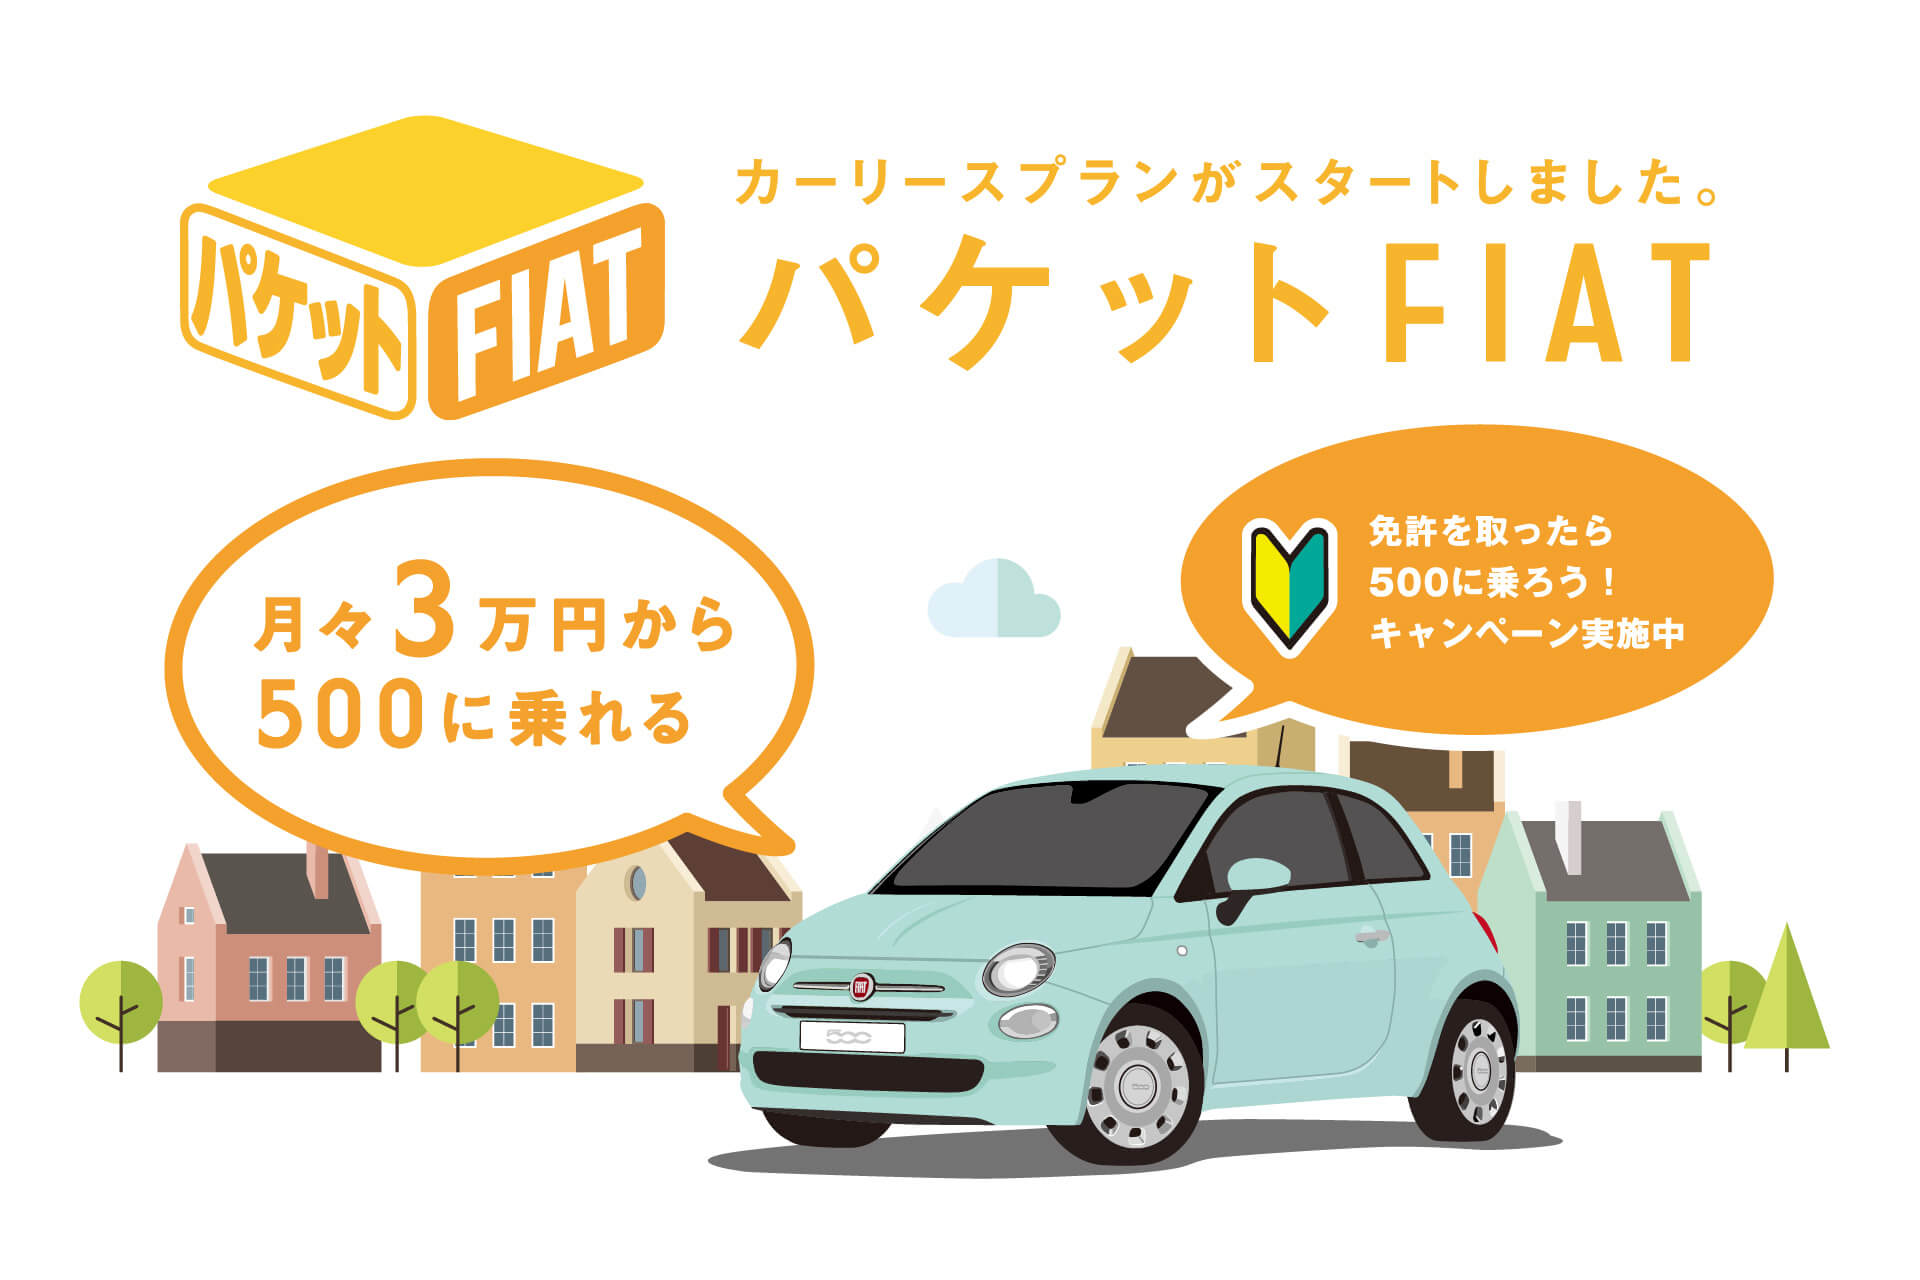 packet　fiat